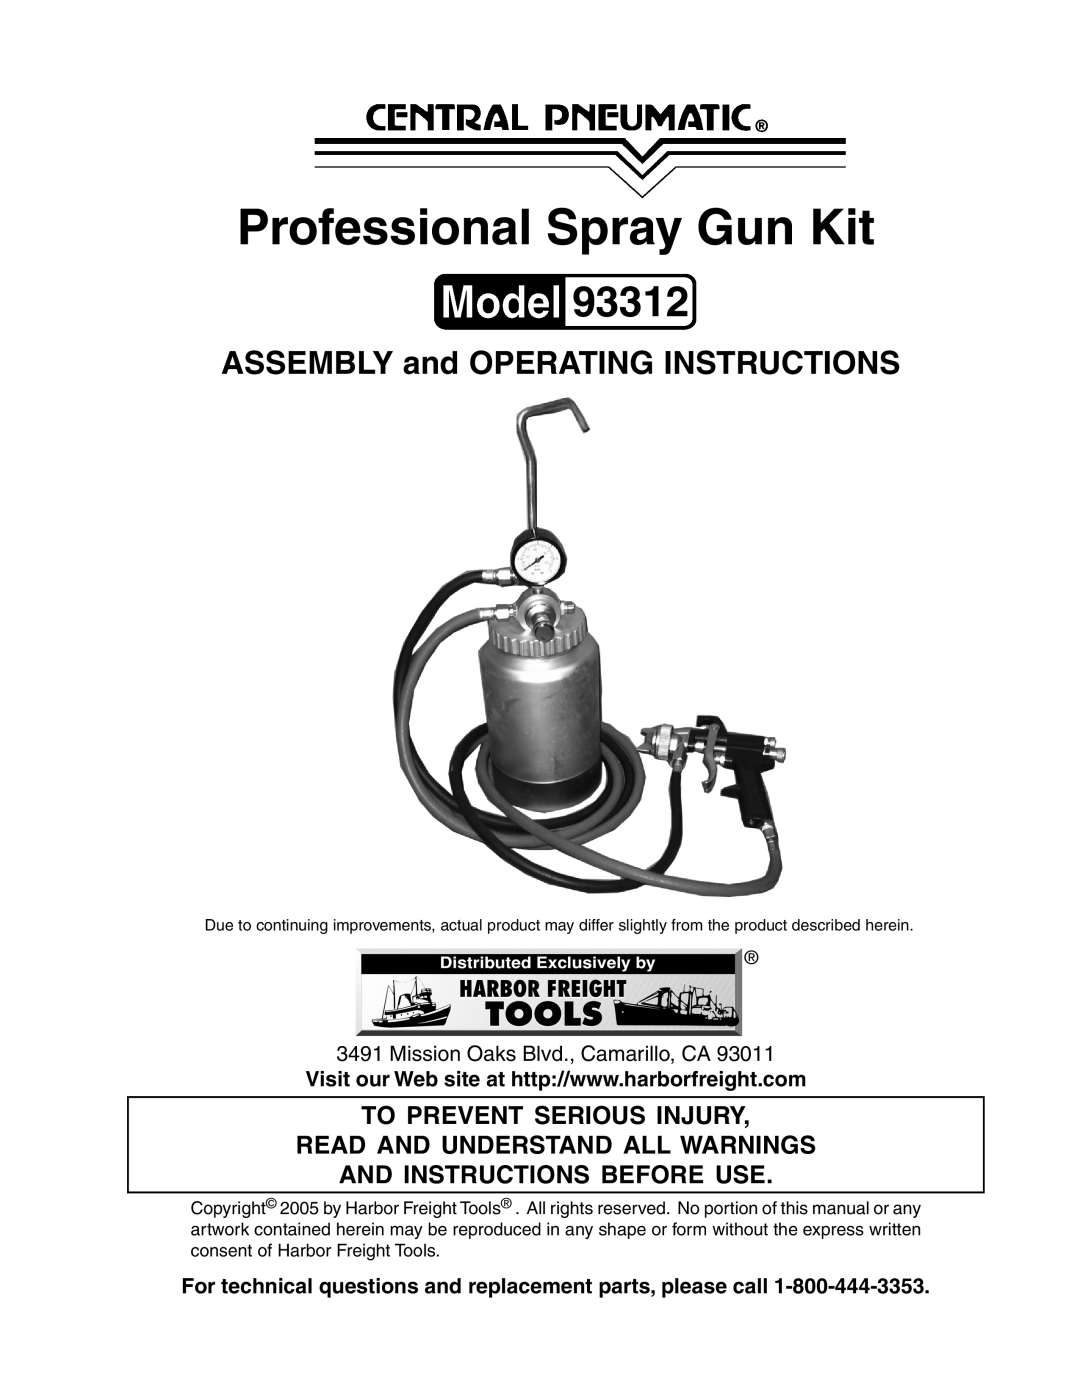 Harbor Freight Tools 91011 operating instructions To Prevent Serious Injury Read And Understand All Warnings, 93312 